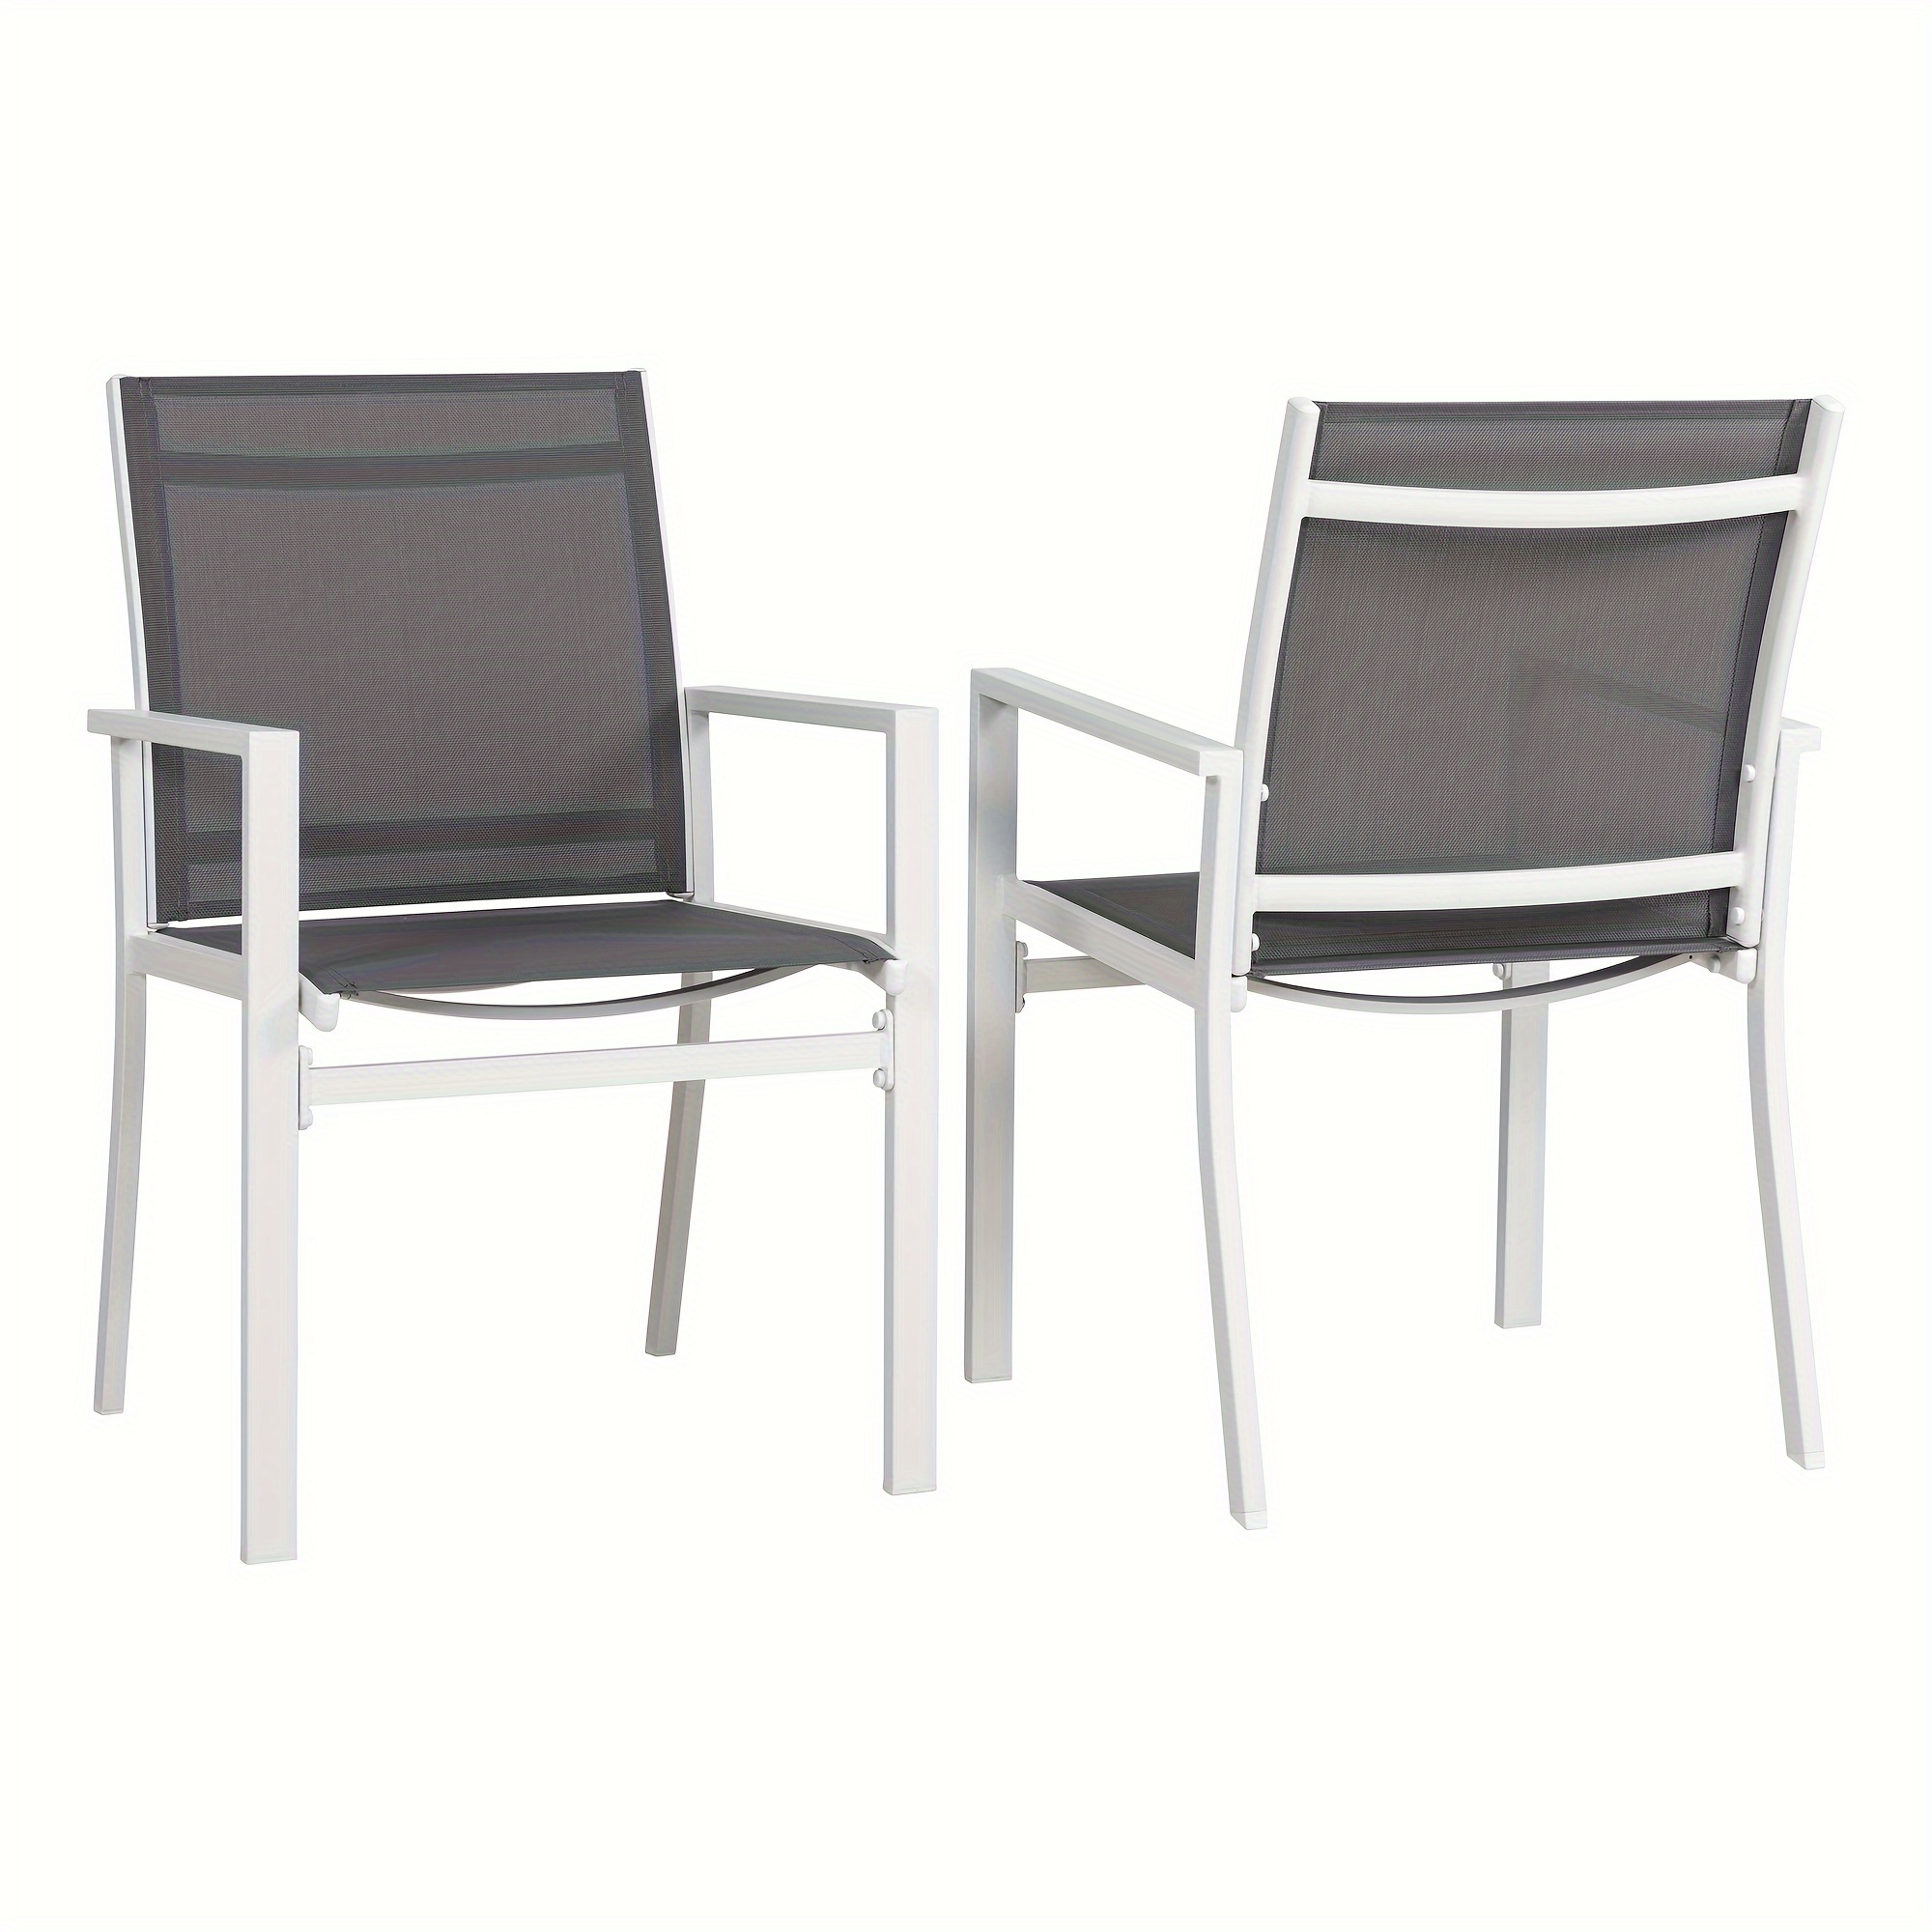 

Vongrasig Patio Dining Chairs Set Of 2, Outdoor Bistro Chair With Arms, All-weather Metal Textile Fabric Chairs Grey